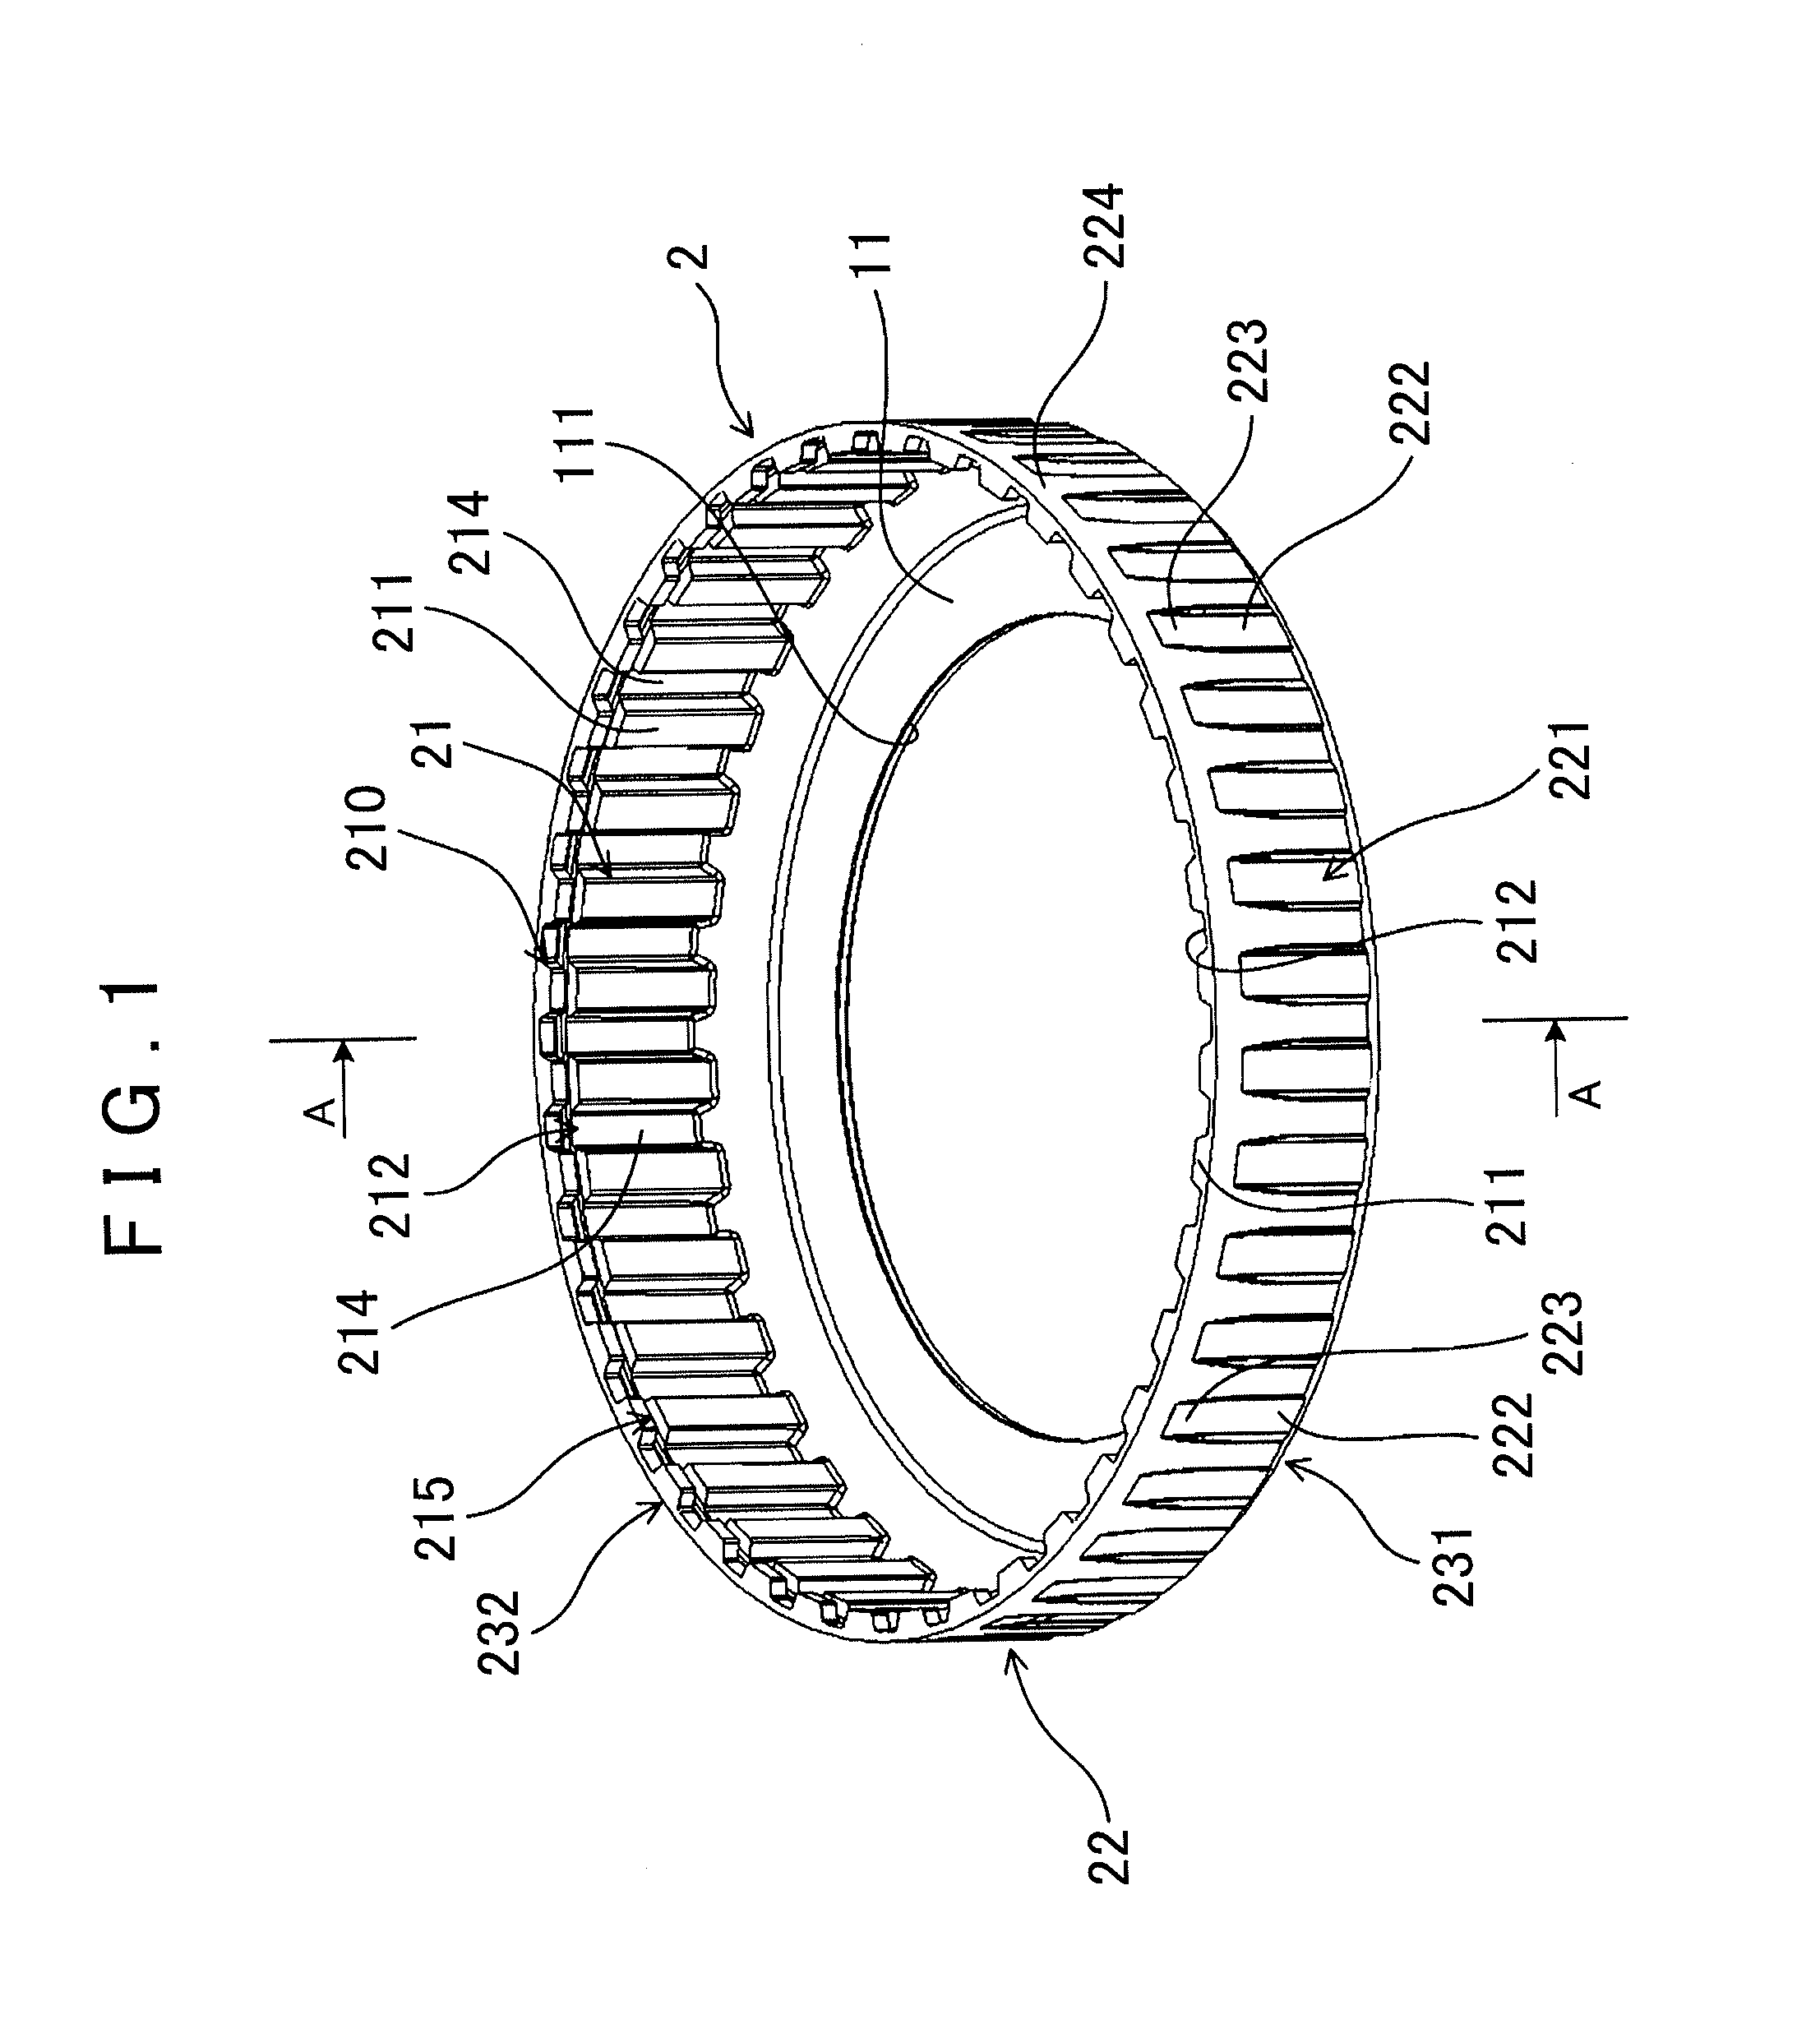 Cup-shaped member including inner peripheral corrugated portion and manufacturing method and manufacturing apparatus for the same